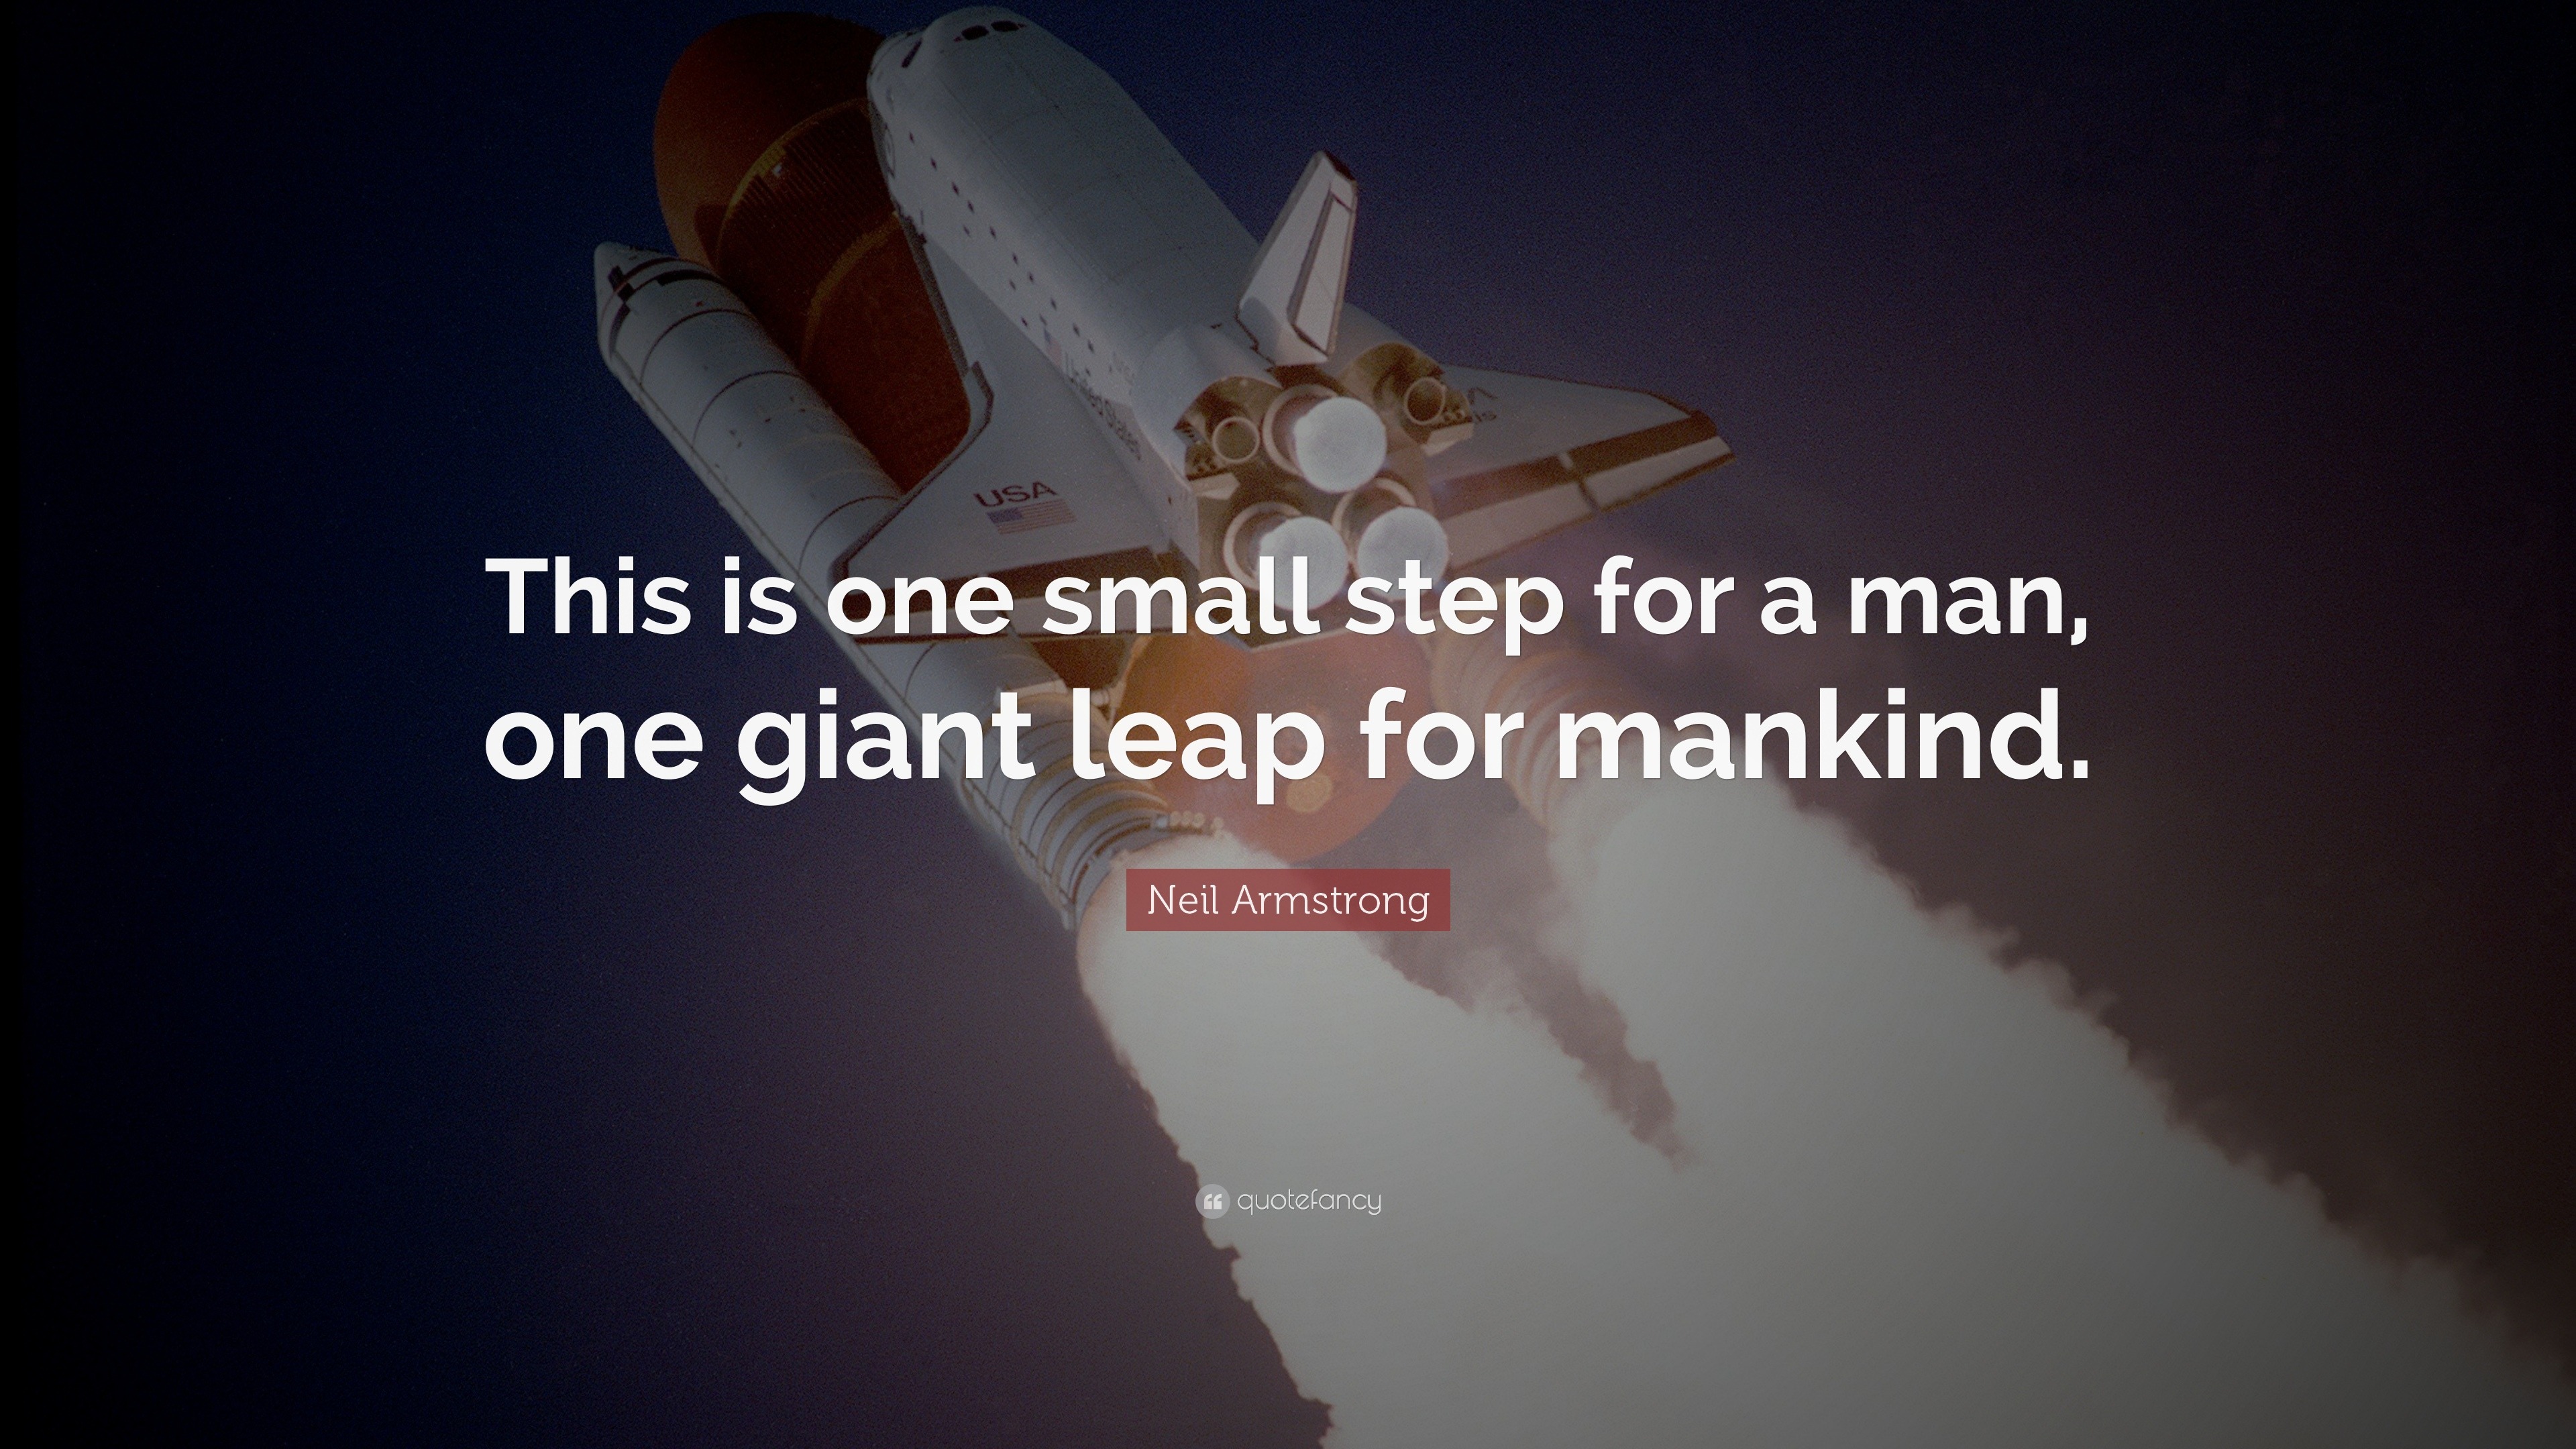 One Small Step for Man or a Man?